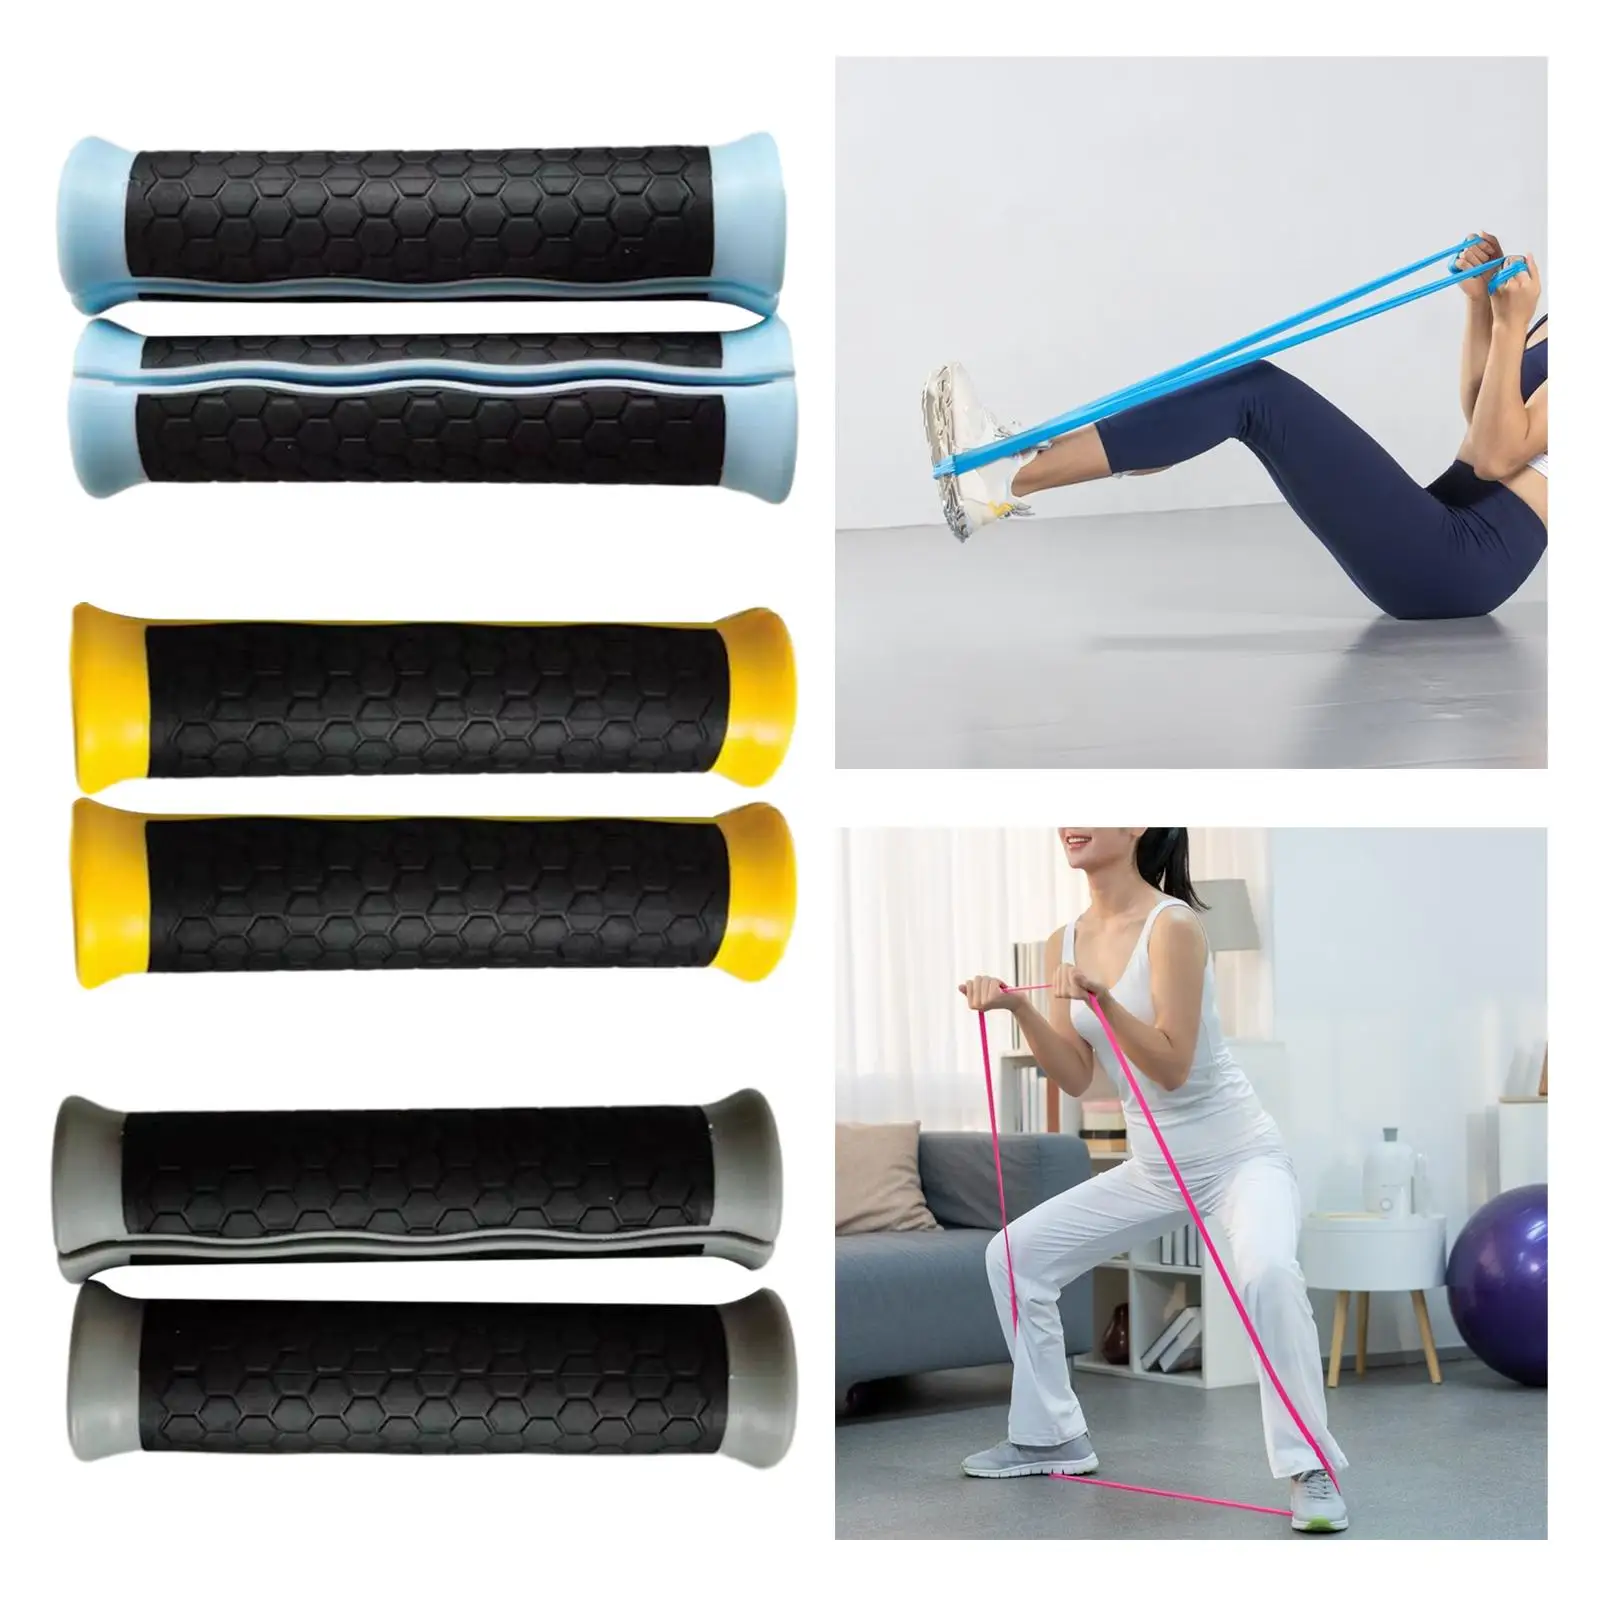 2x Resistance Bands Foam Handles Heavy Duty Fitness Equipment Replace Workout Accessories Protect Your Hands Exercise Handles